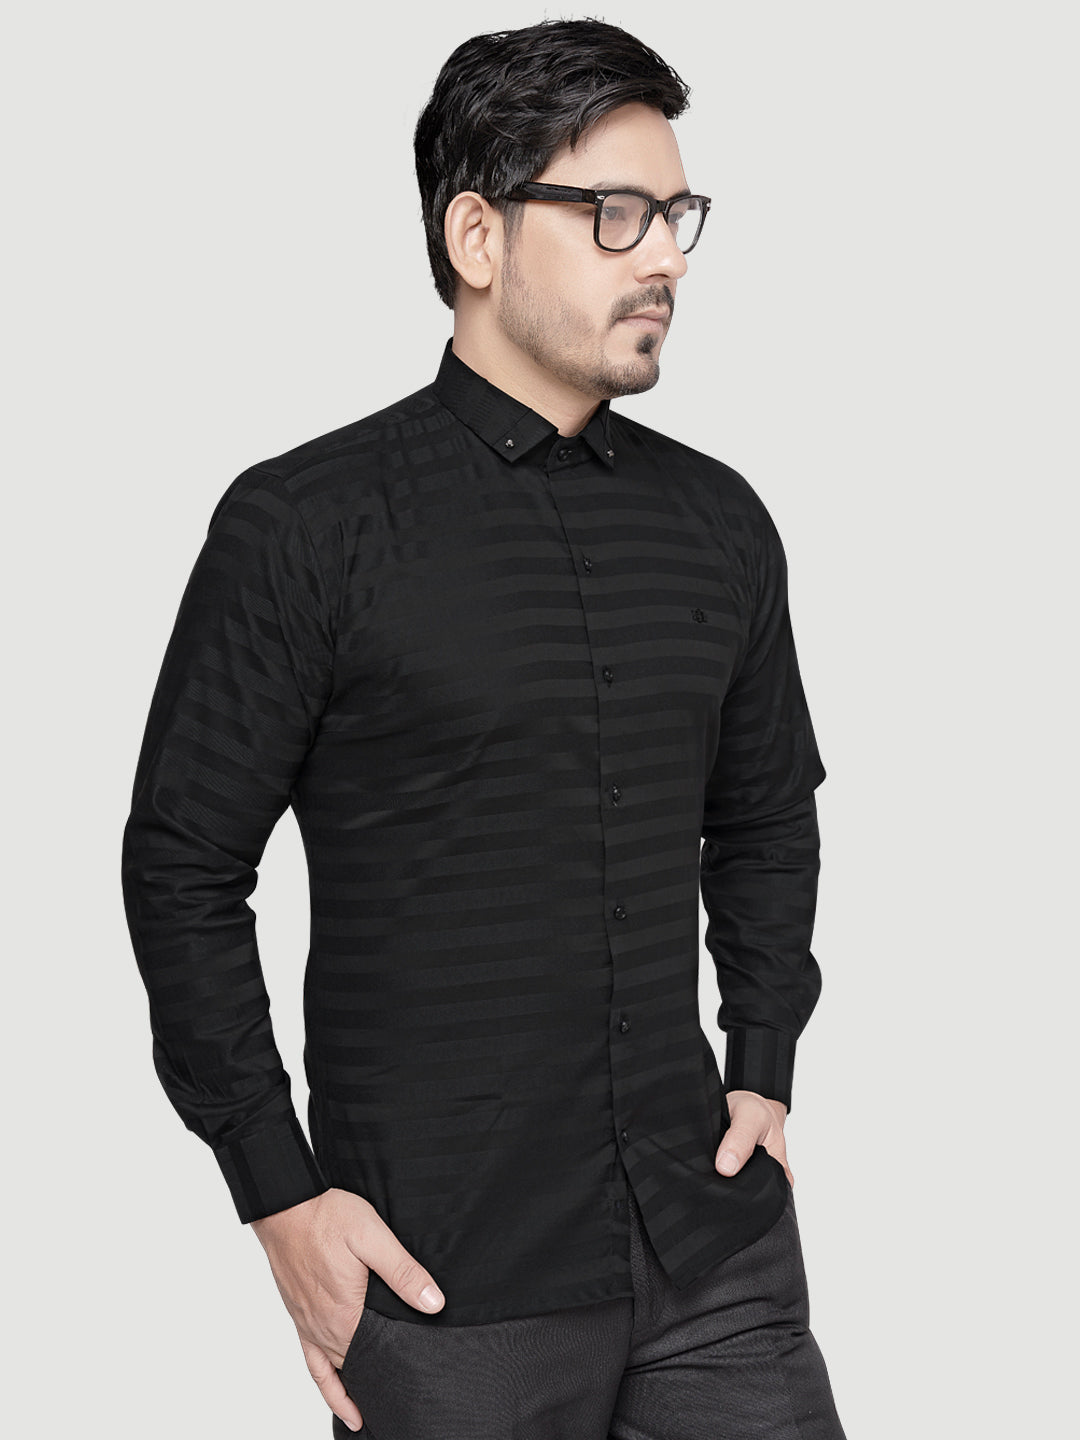 Black and White Shirts Men's Designer Weft Shirt with Collar Accessory-5